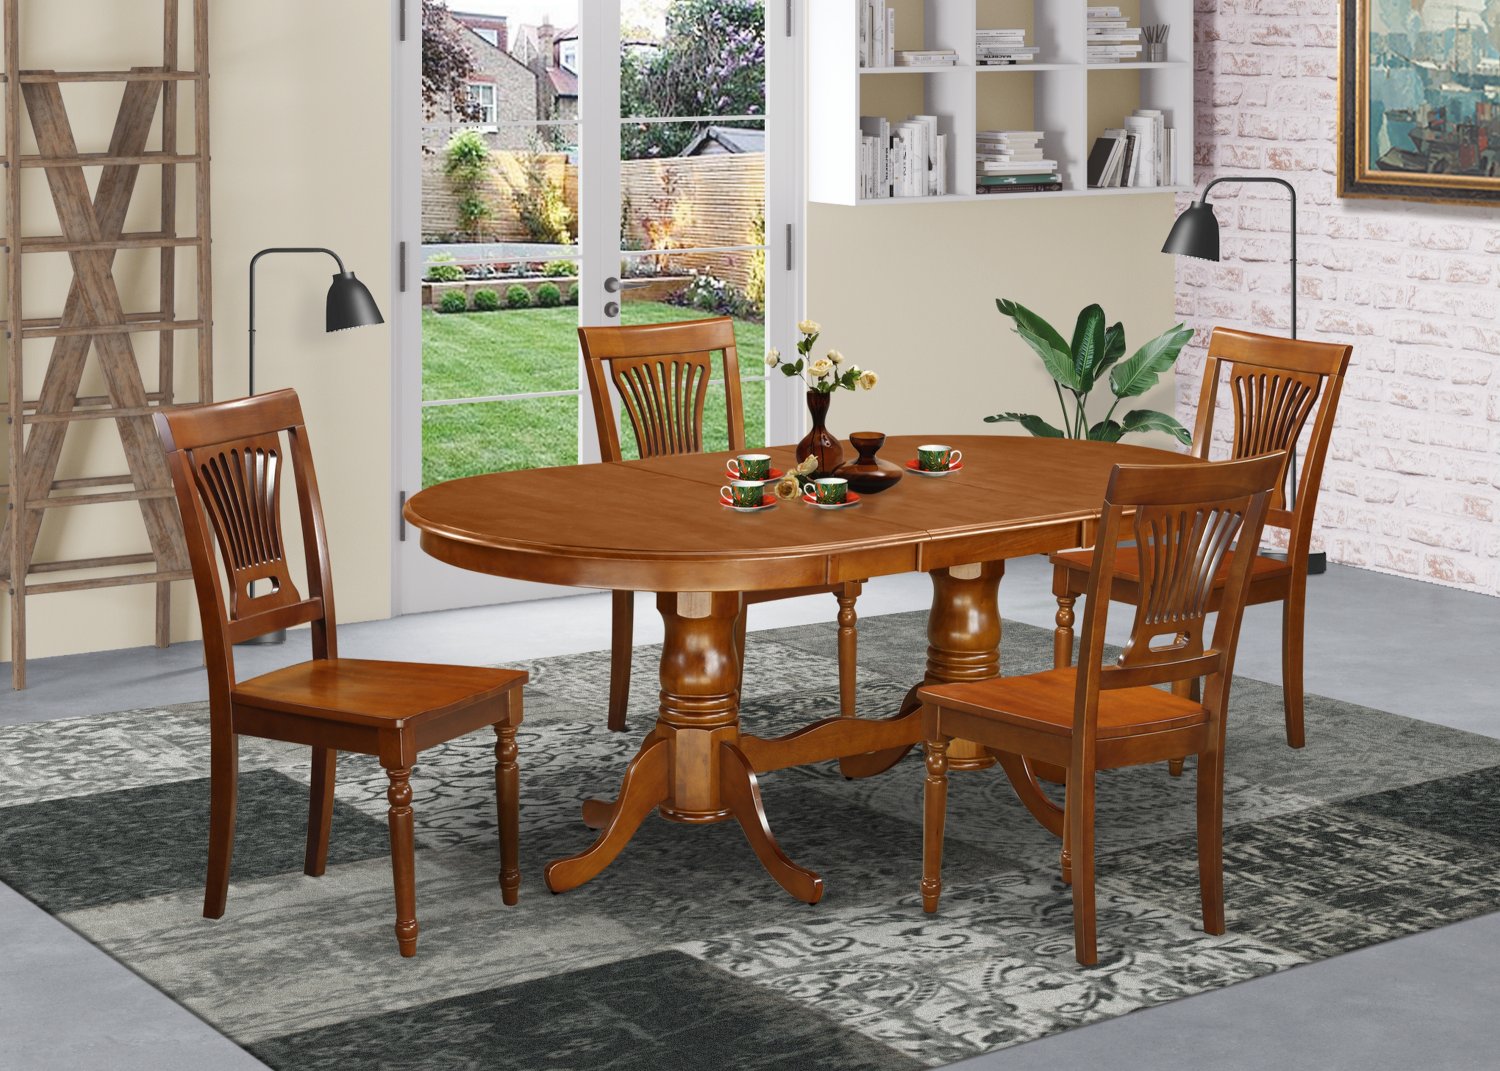 5-PC Newton Oval Dining Room Set Table with 4 Wood Seat Chairs in